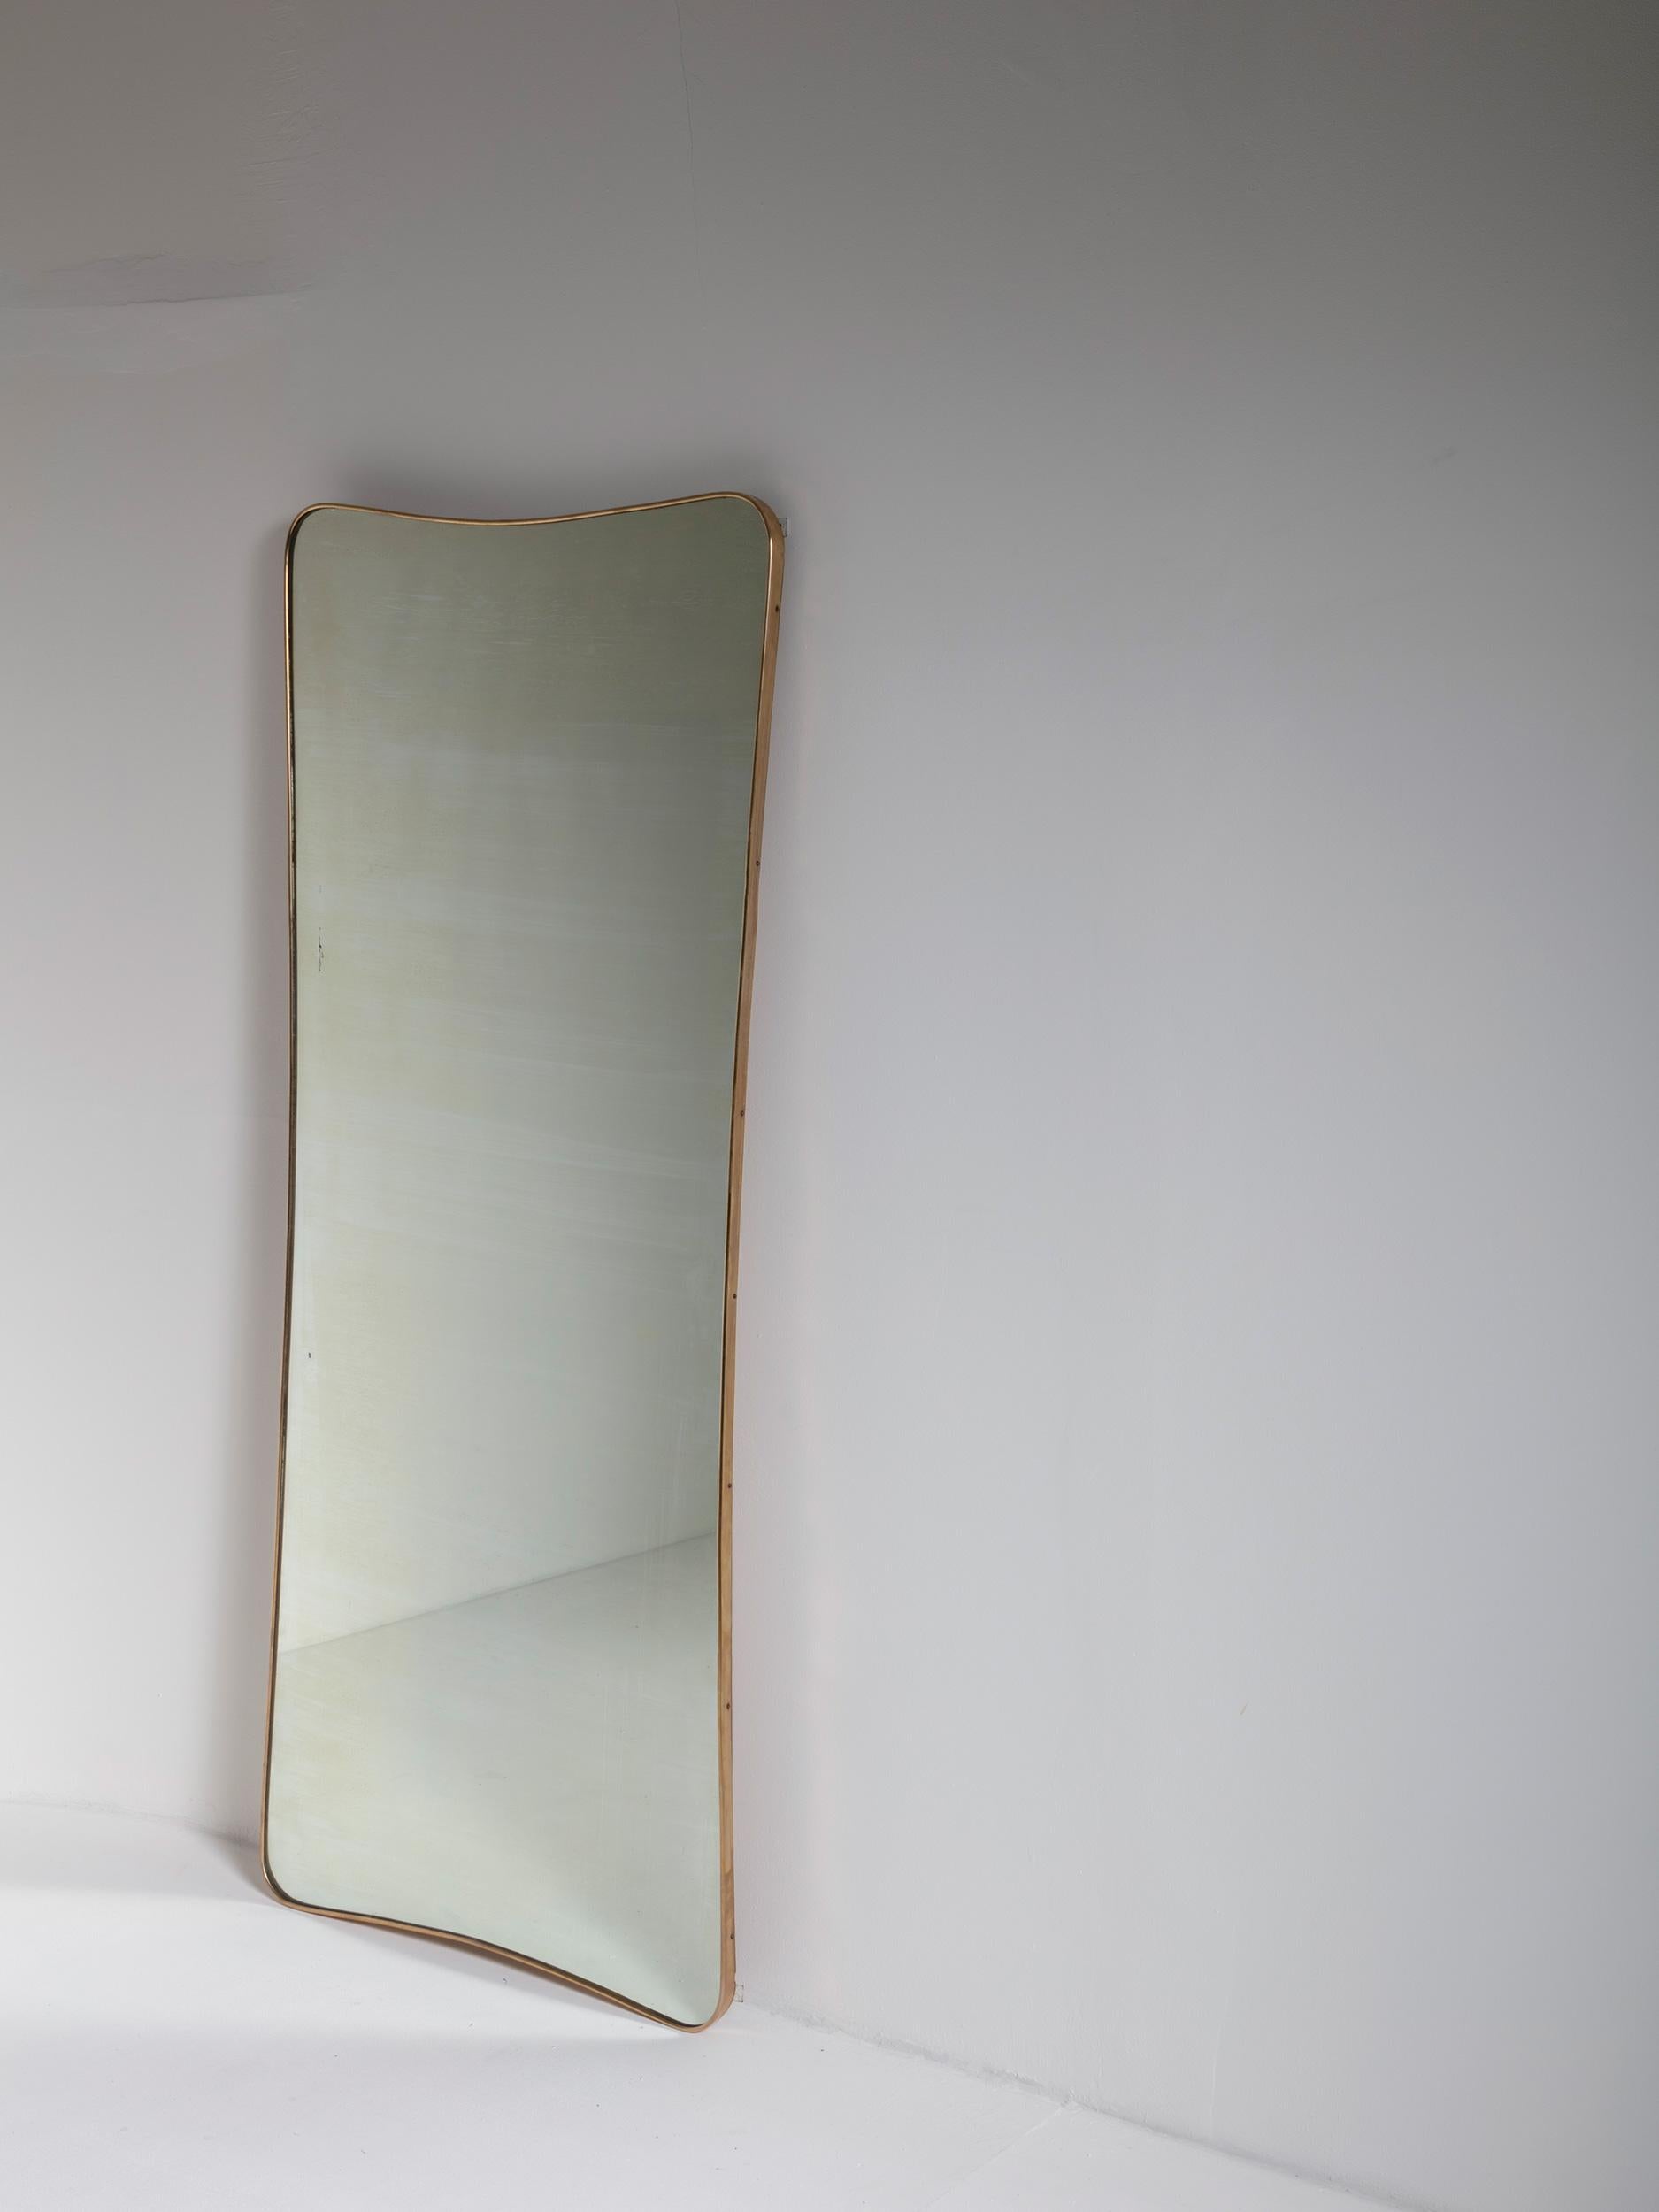 Remarkable Italian 1950s wall mirror with brass frame.
Thick glass and wood back panel for this piece that can be used in both vertical and horizontal positions.